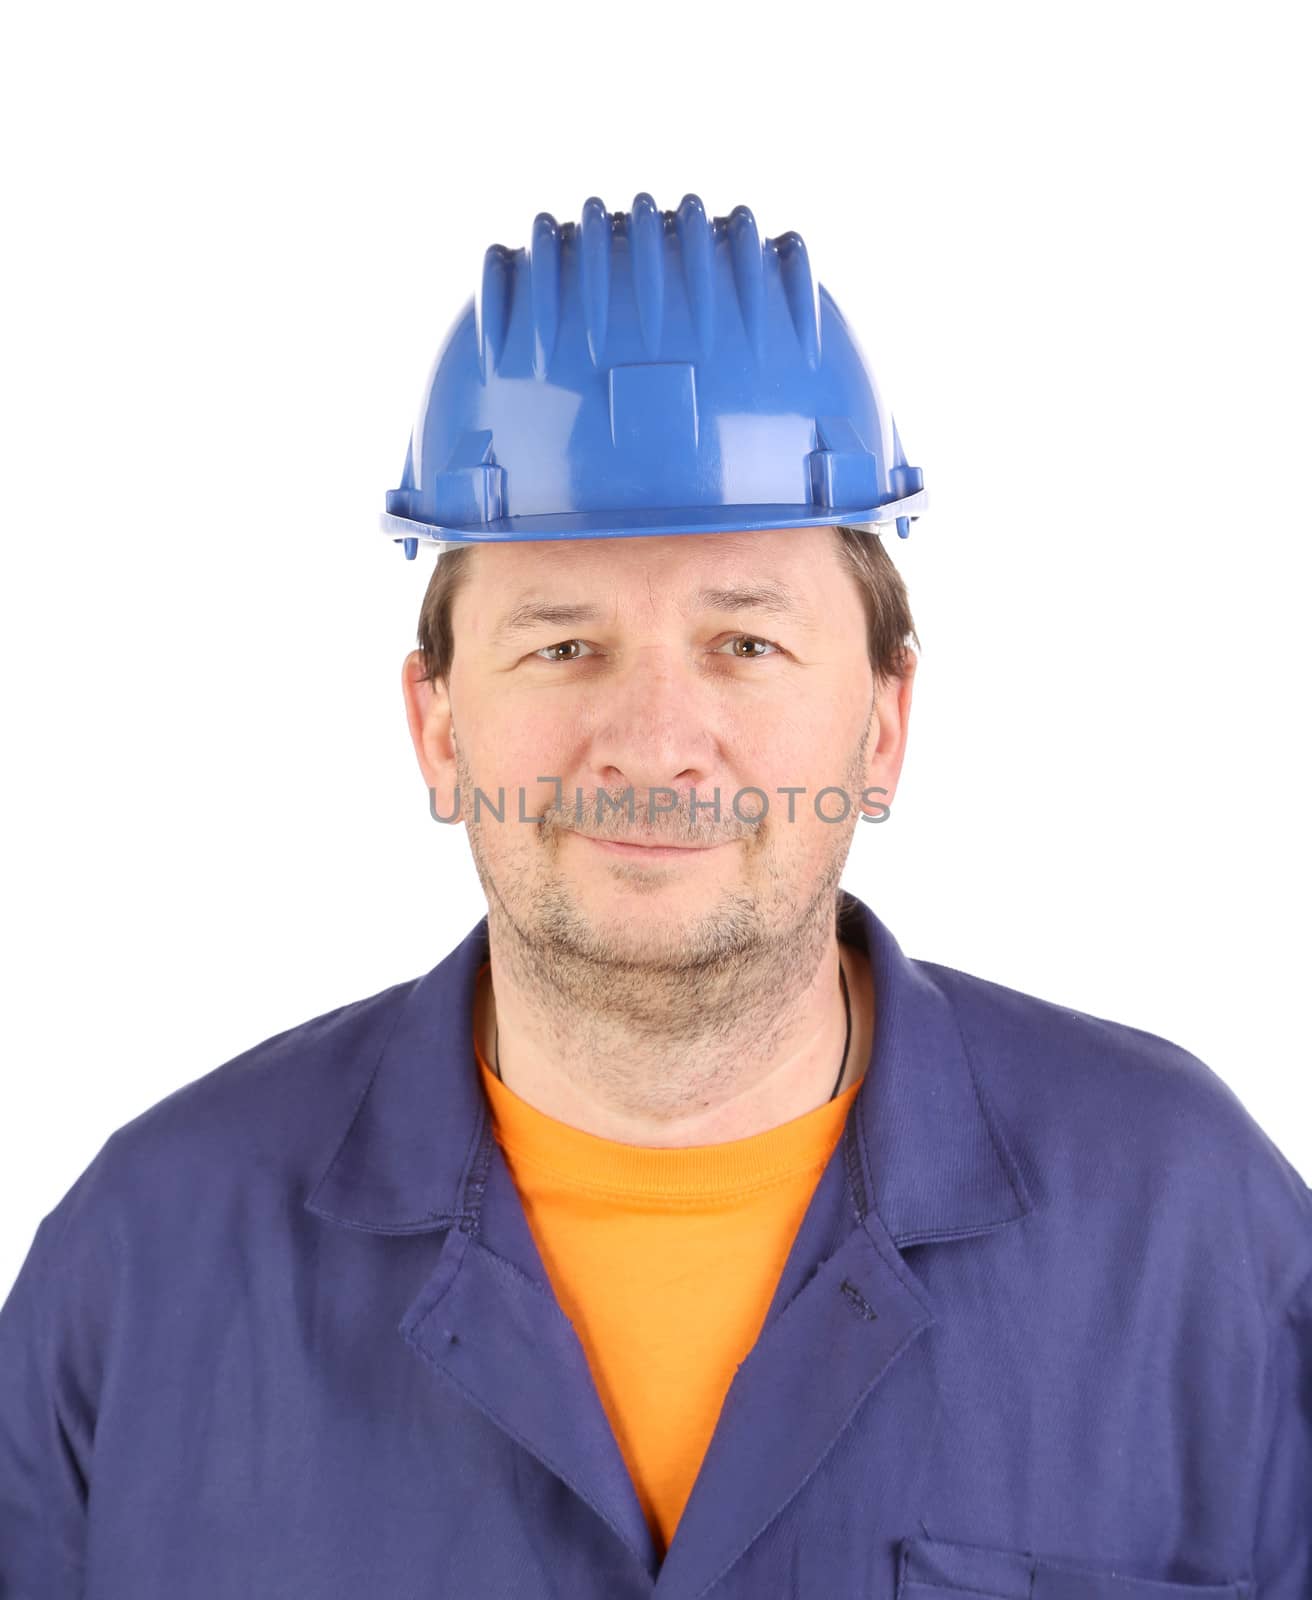 Confident worker portrait with hard hat. Isolated on a white background.